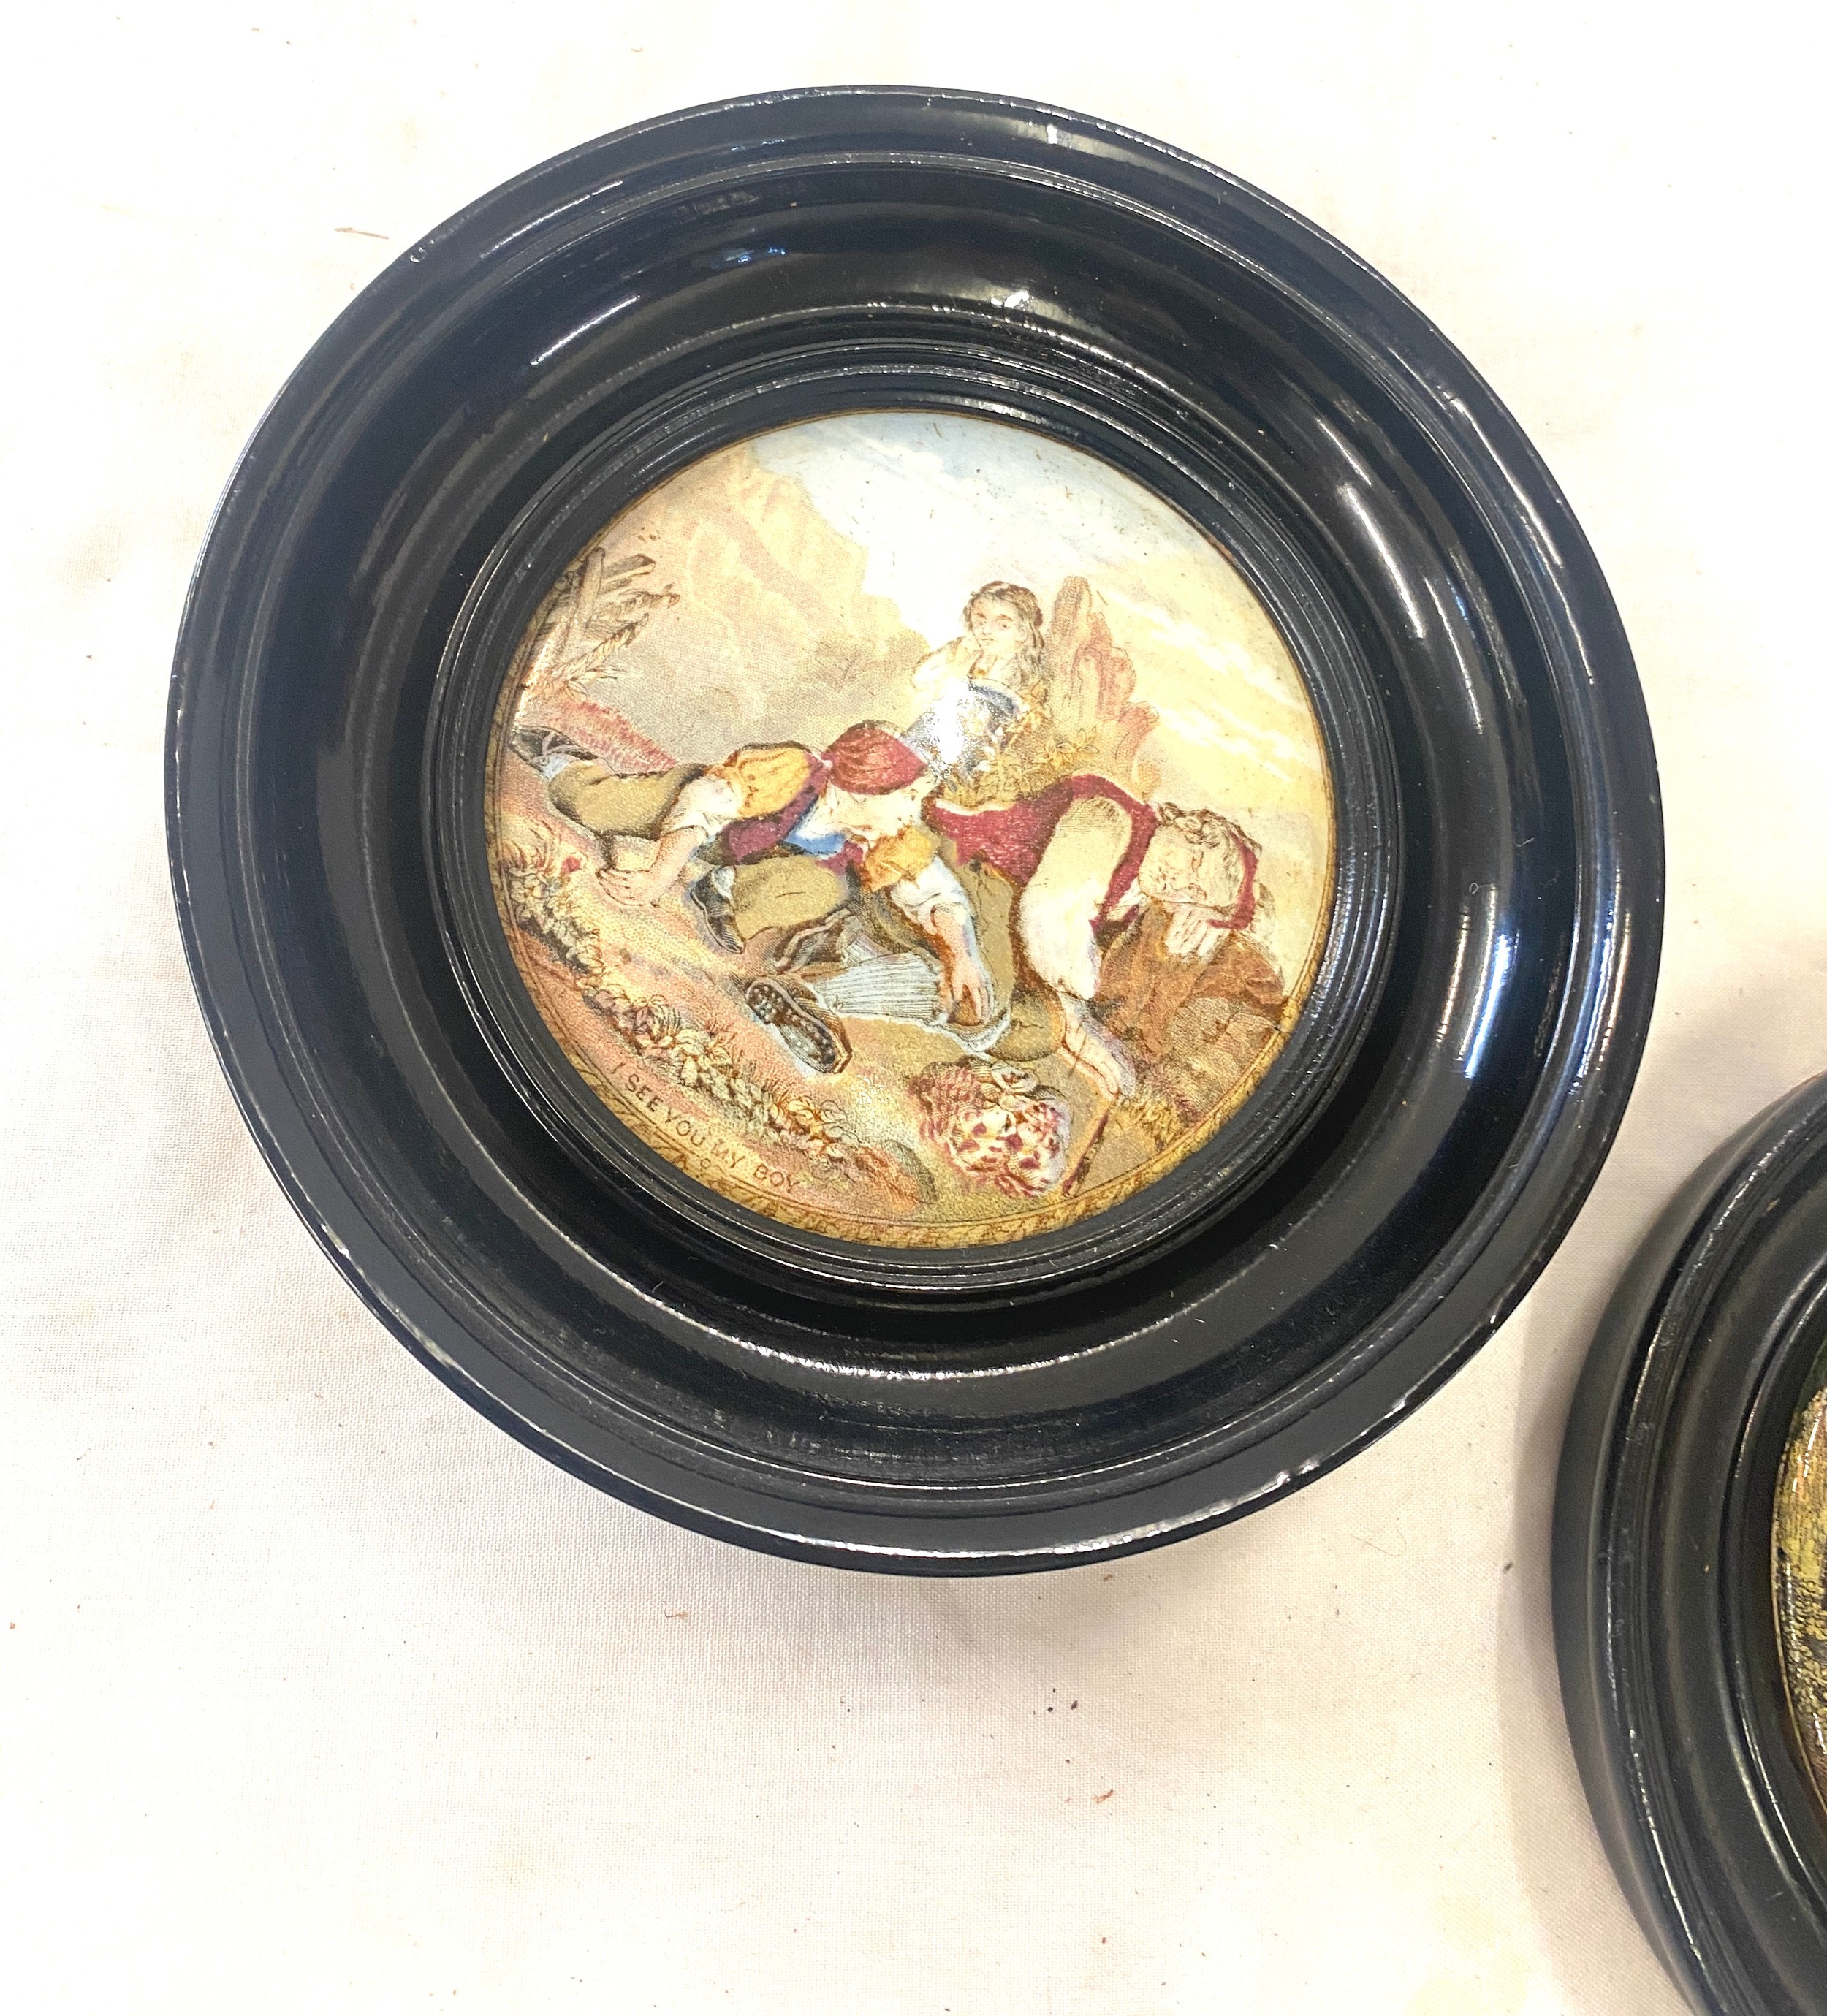 Two vintage framed pot lids includes i see you my boy and charity, largest measures approx 6.5 - Image 2 of 4